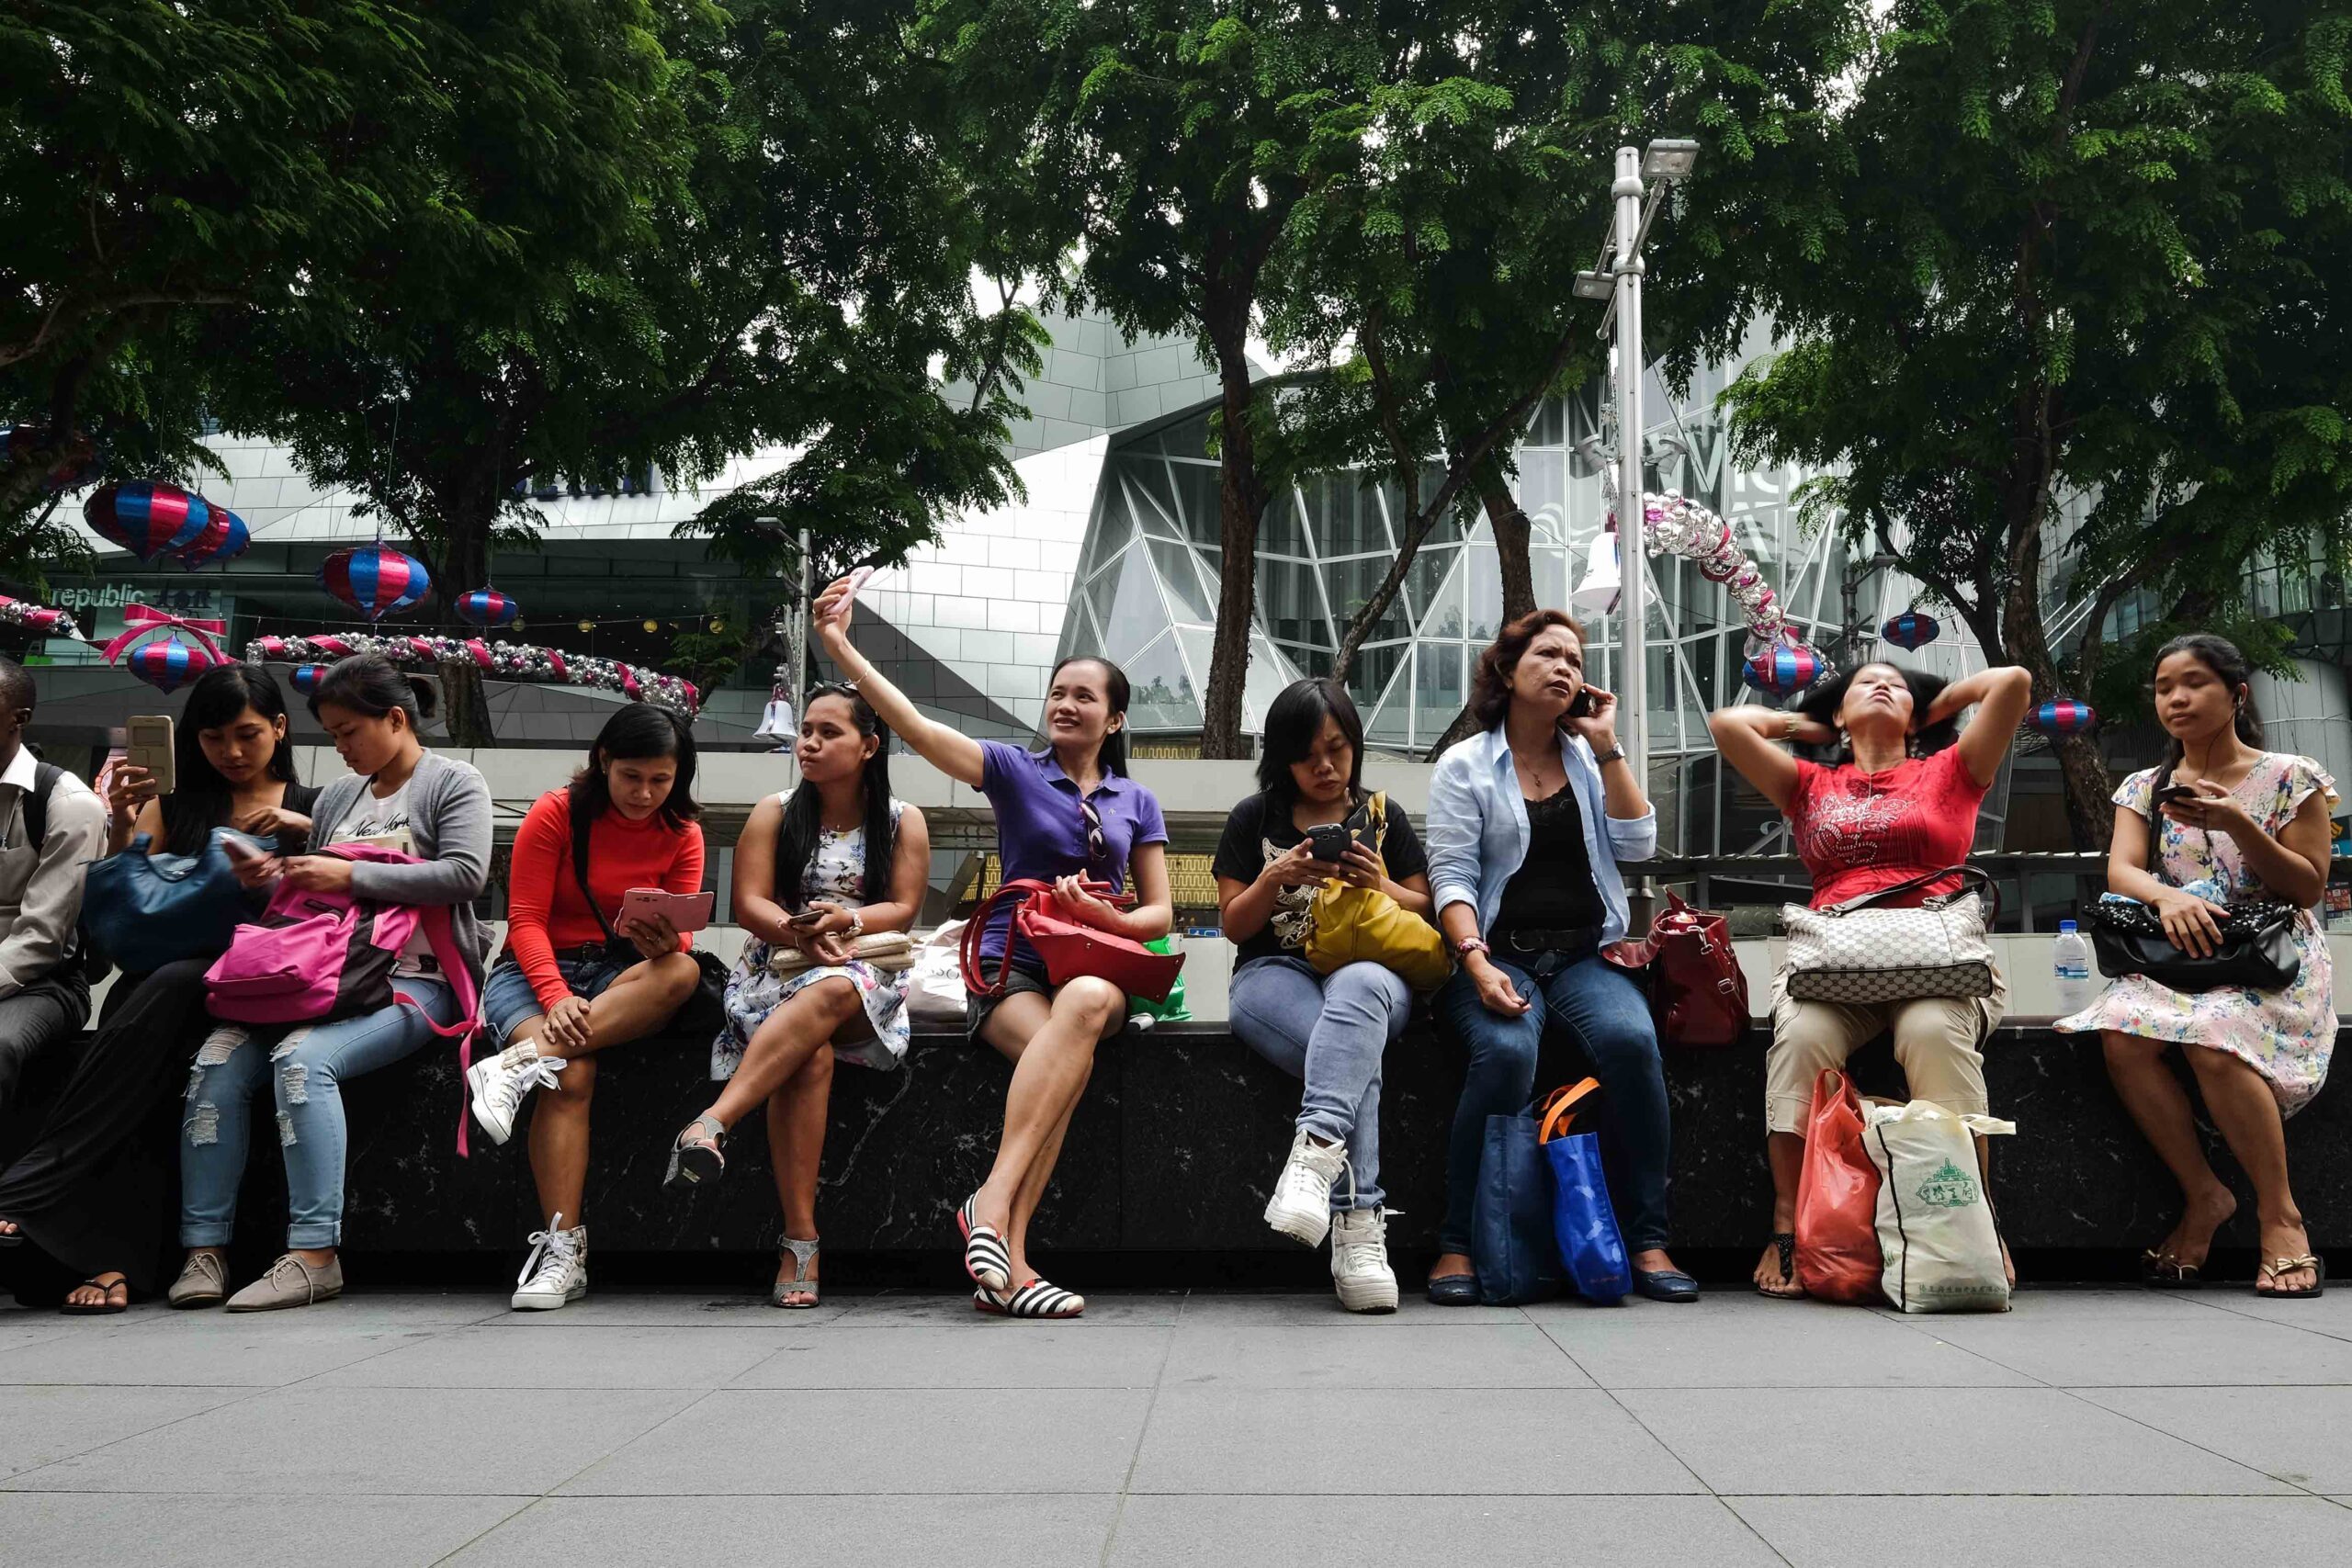 OFWs in Singapore: Who will they vote for in 2016?